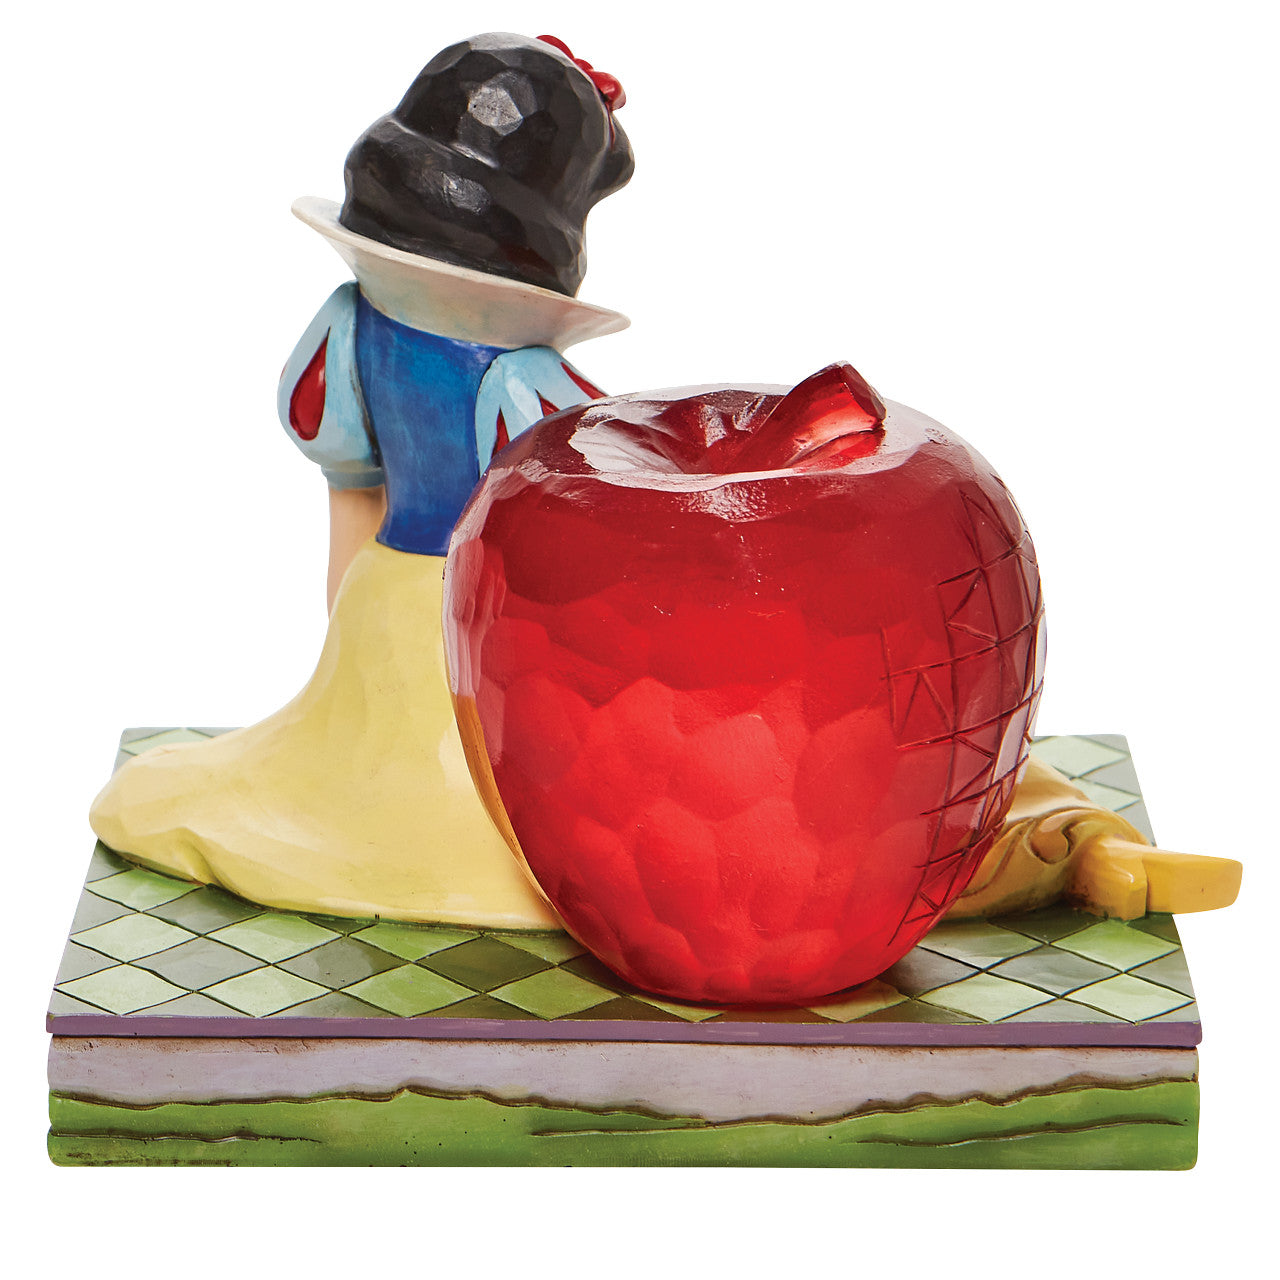 A Tempting Offer - Snow White with Apple